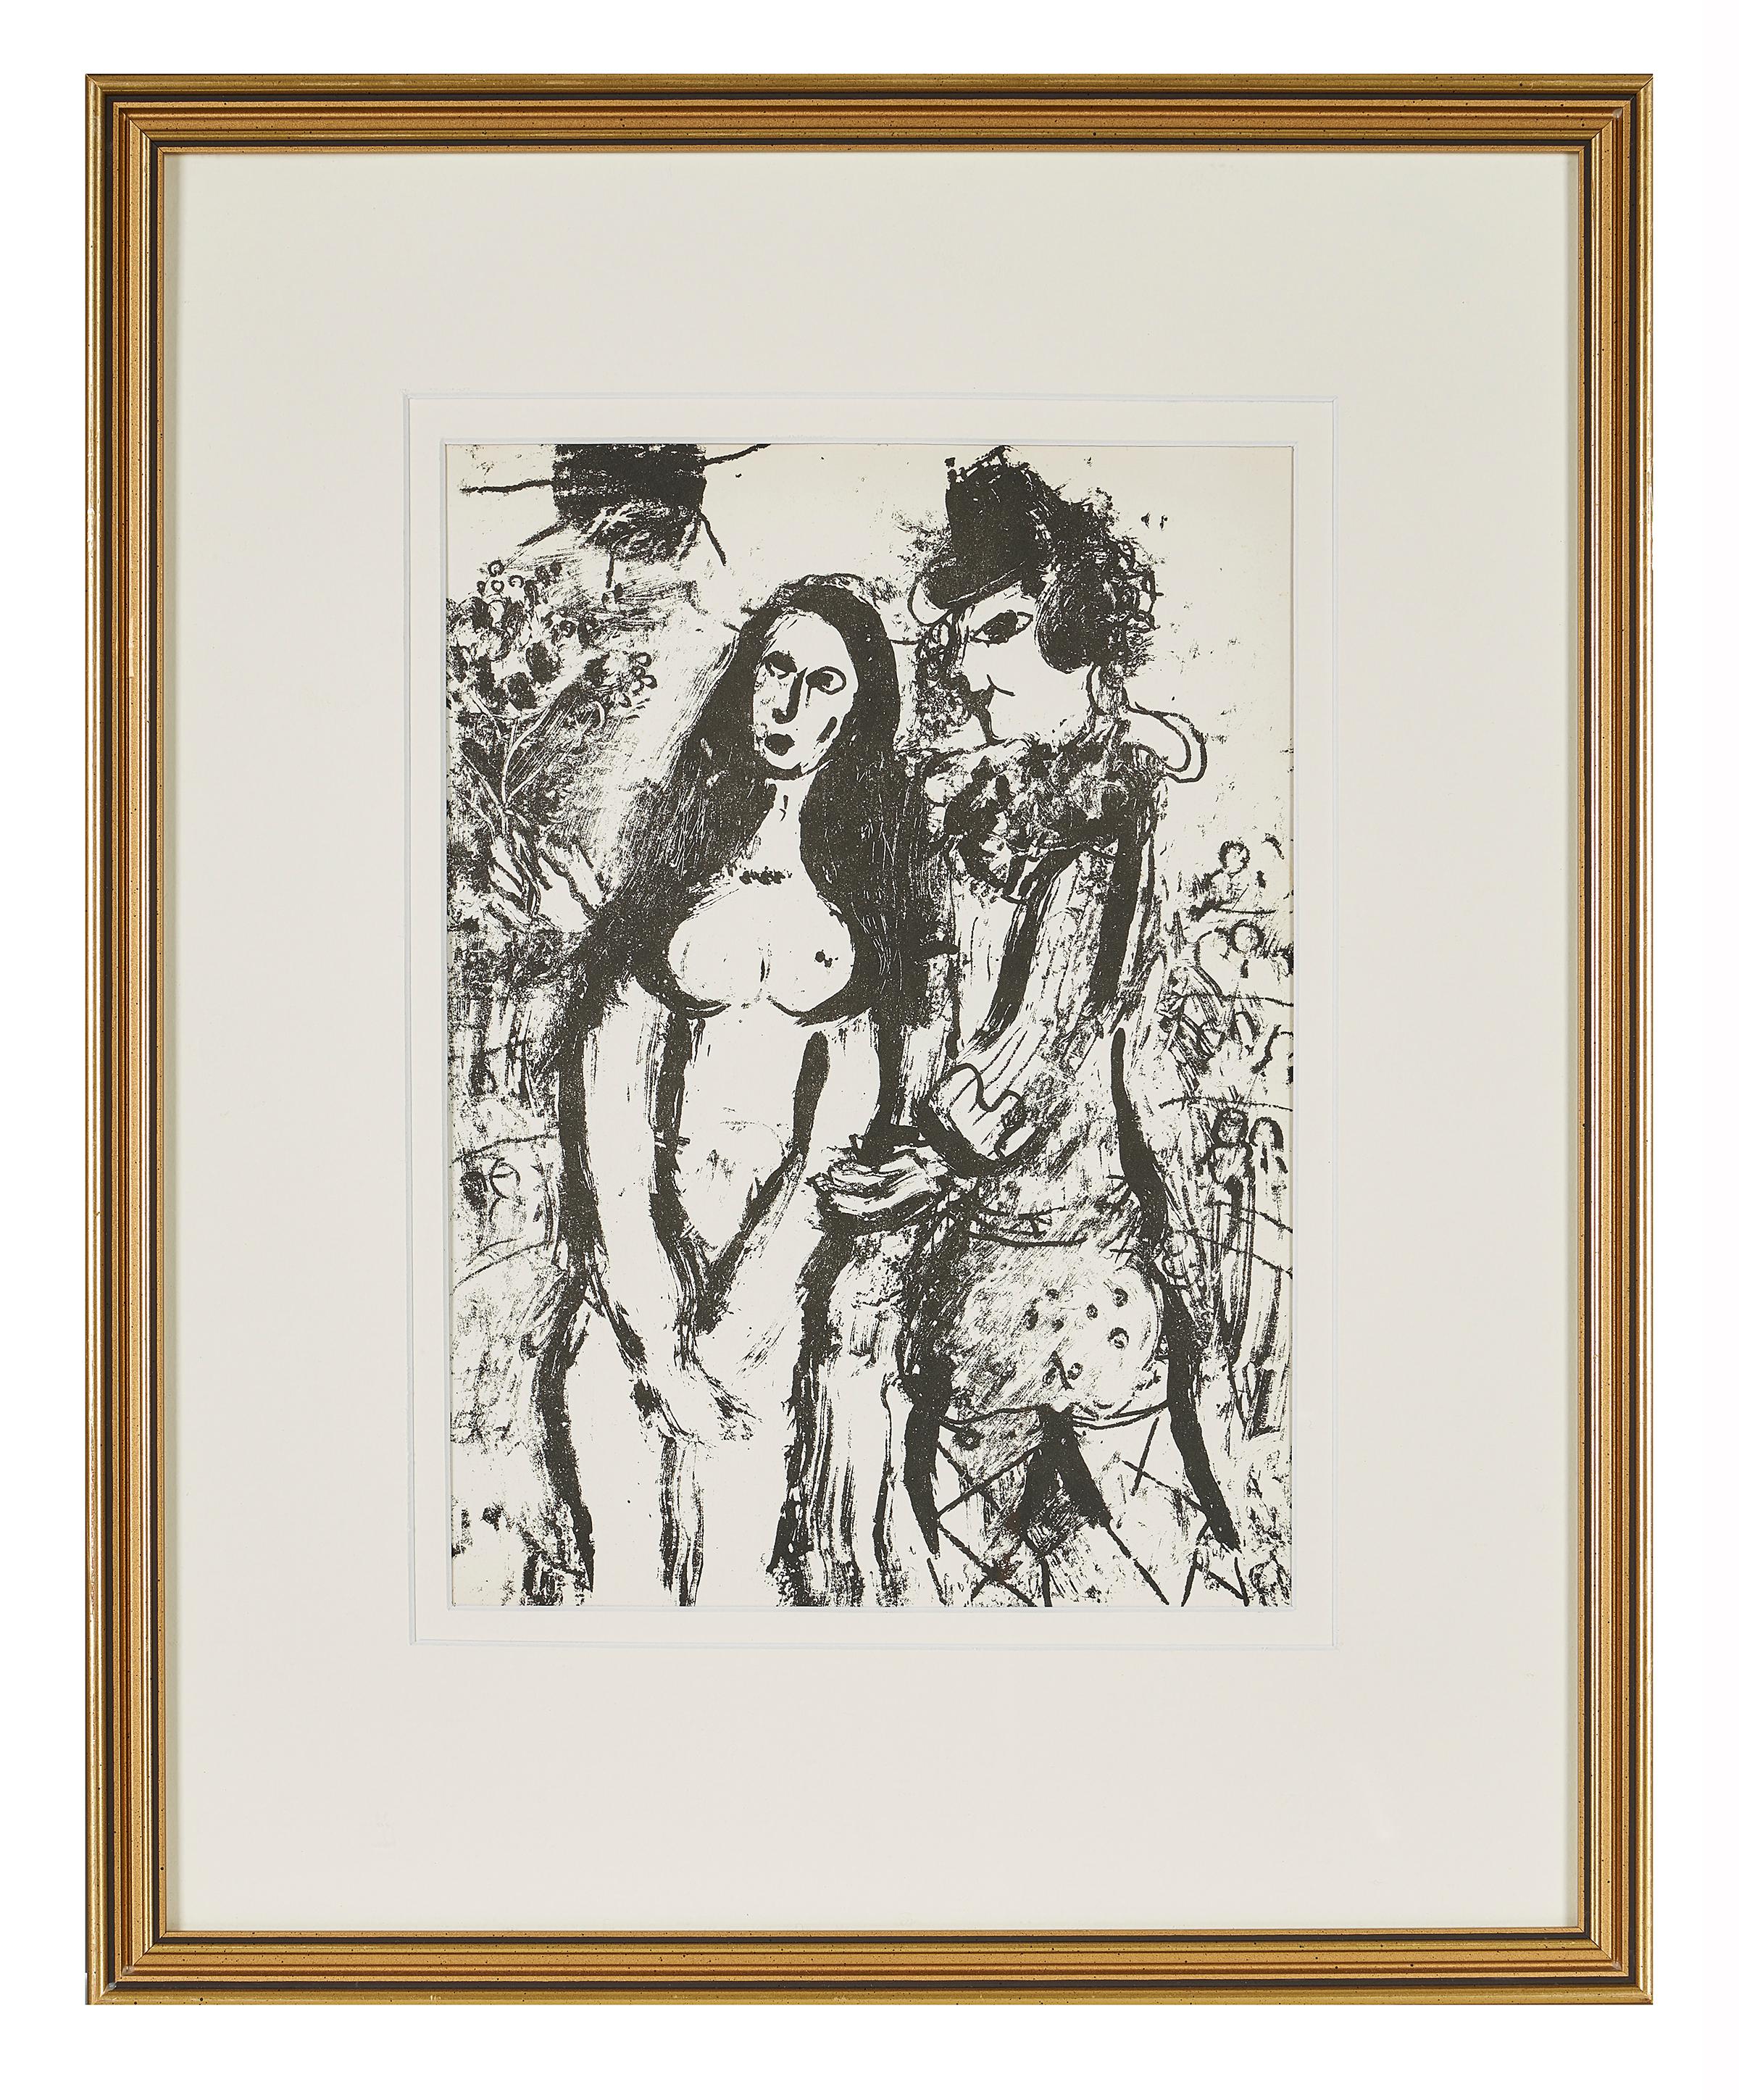 Marc Chagall (French/ Russian,1887-1985), 'The Clown in Love' (Le Clown Amoureux), lithograph on smooth velin paper, printed by Mourlot, Paris, and published by Éditions André Sauret, Monte-Carlo in 1963, unsigned as issued, mounted and framed.